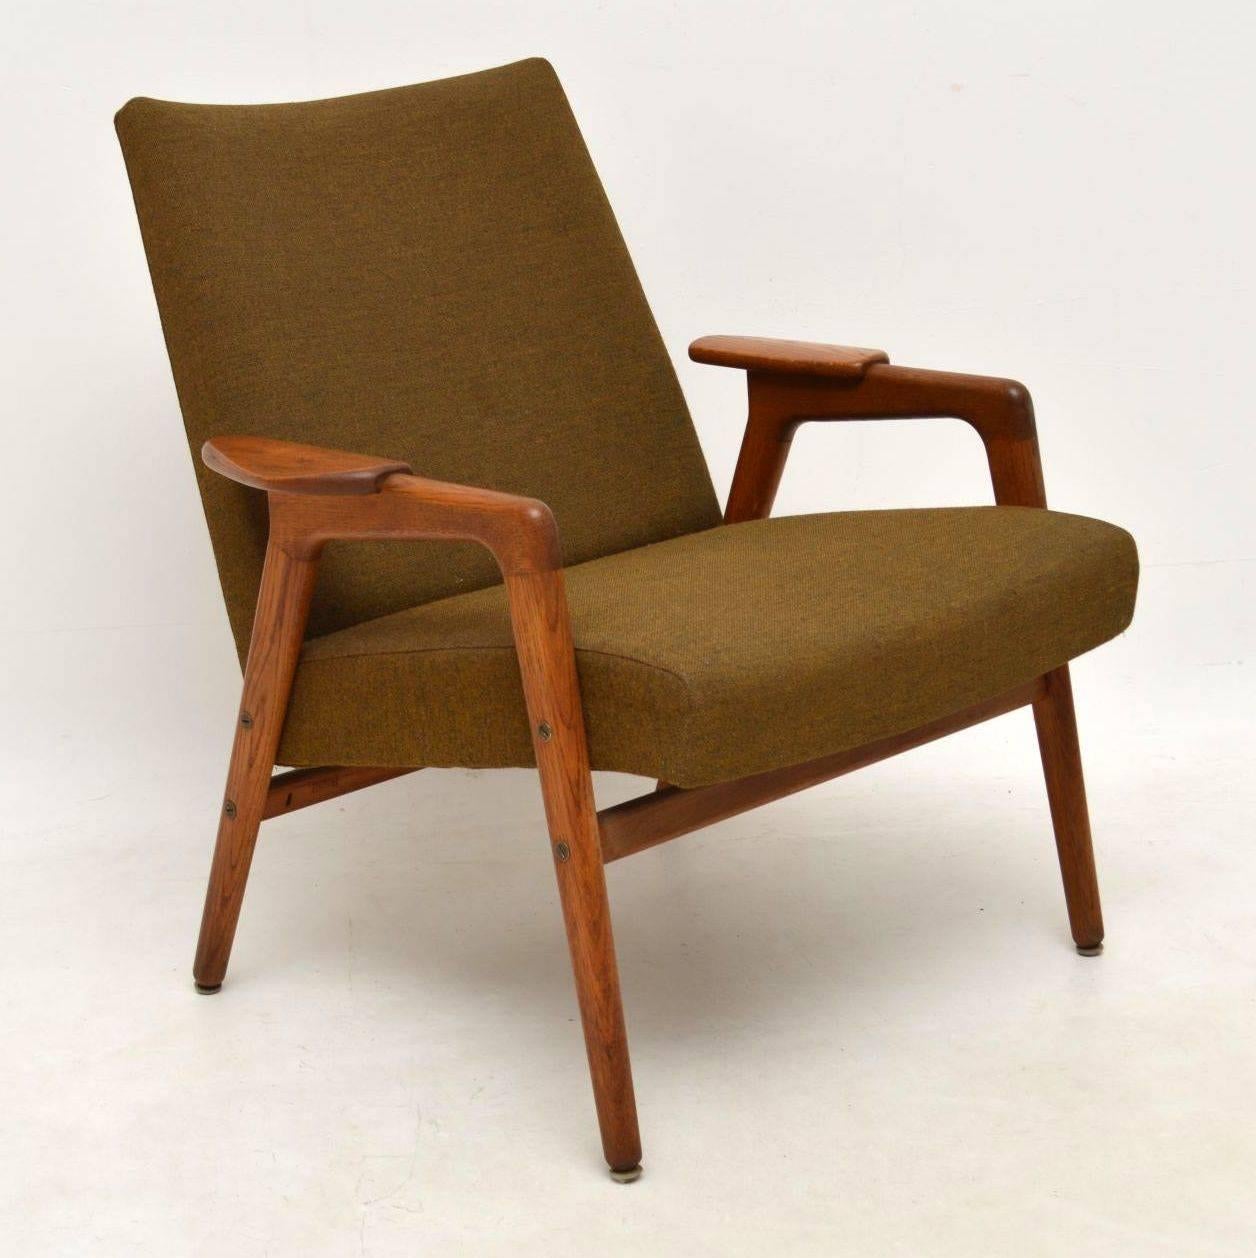 A beautifully designed vintage armchair in teak, this was made in Sweden during the 1960s, it was designed by Yngve Ekstrom and this model is called the ‘Ruster’ chair. The condition is great for its age, the frame is clean, sturdy and sound, with